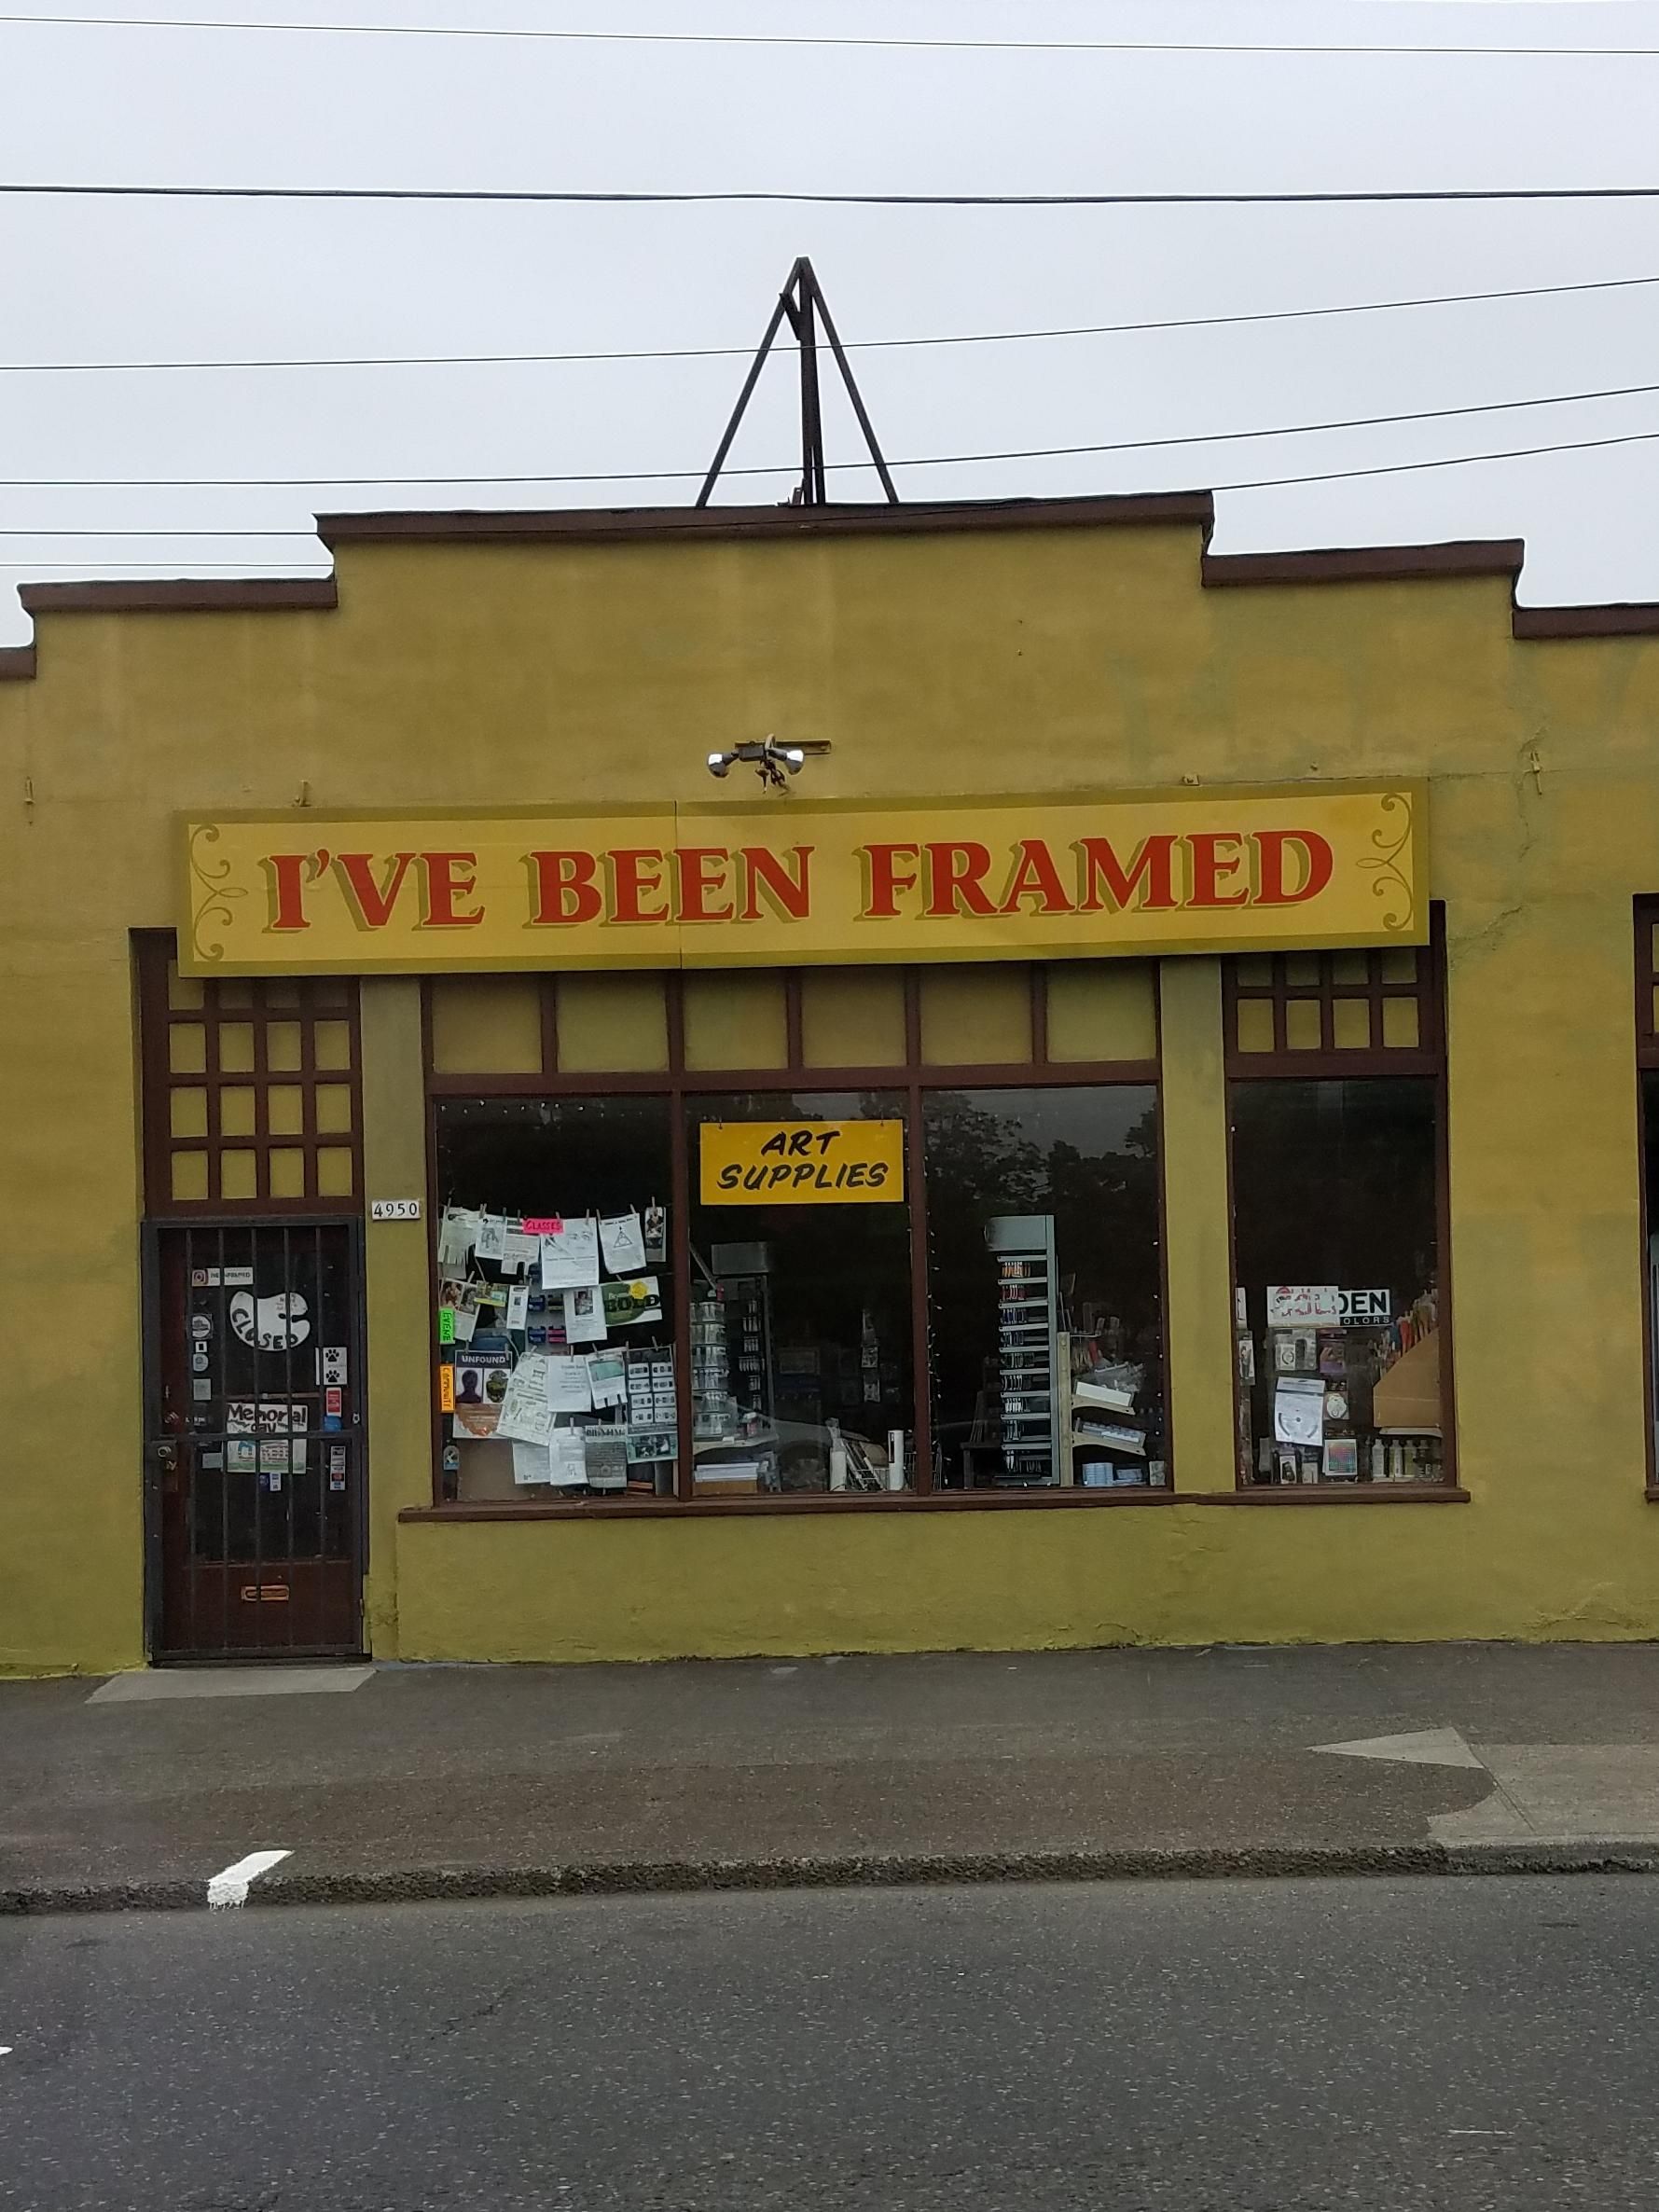 The name of this art store.